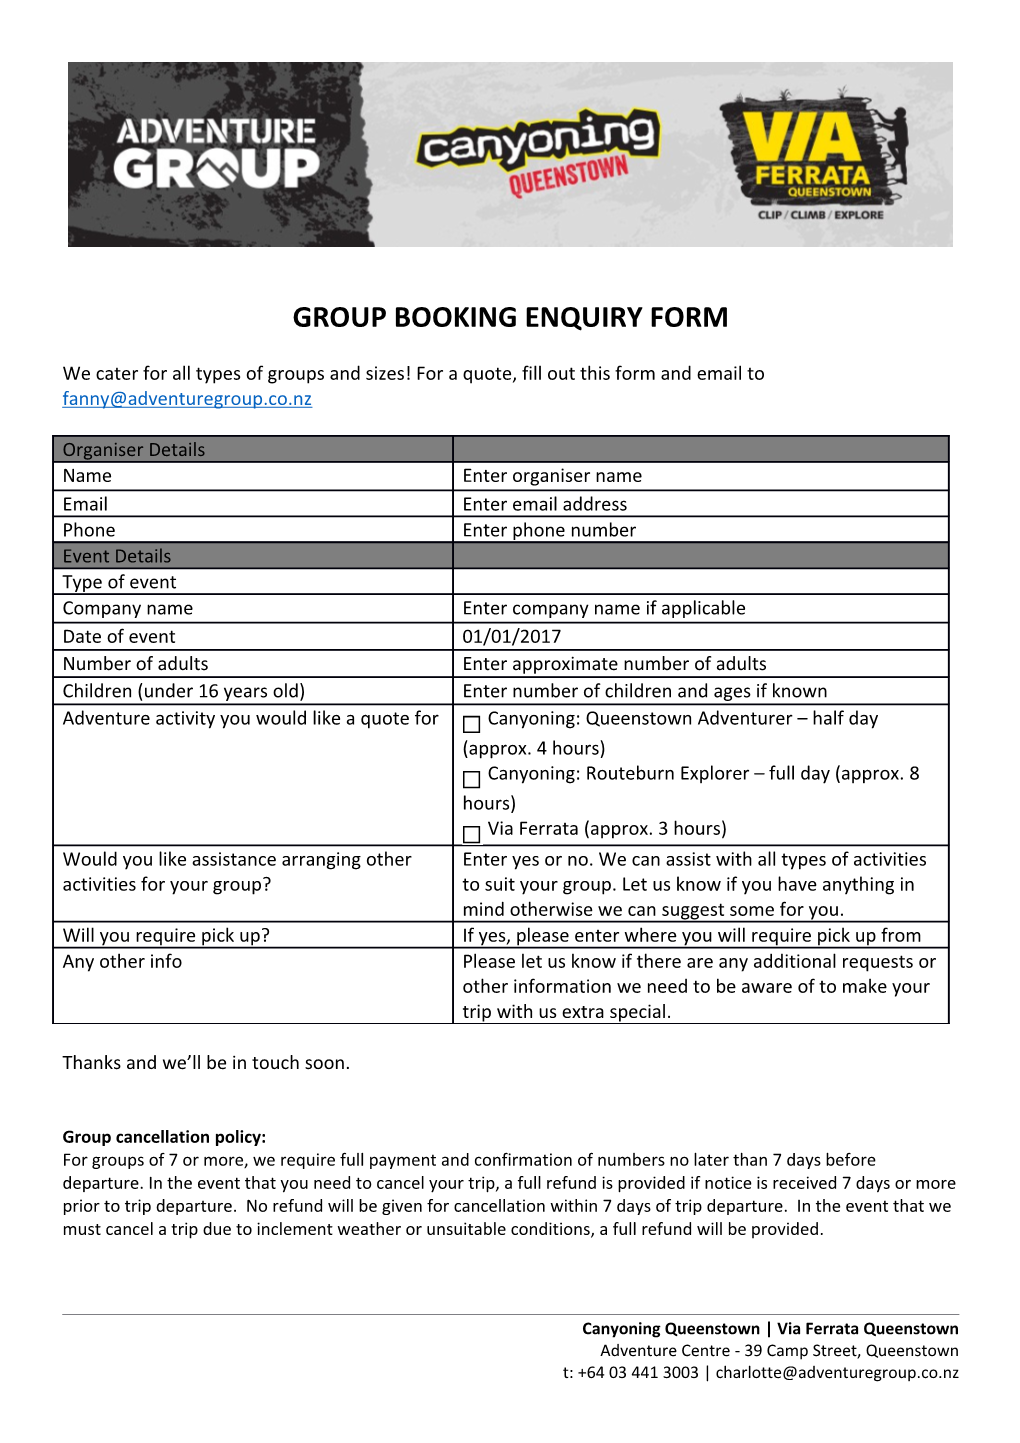 Group Booking Enquiry Form